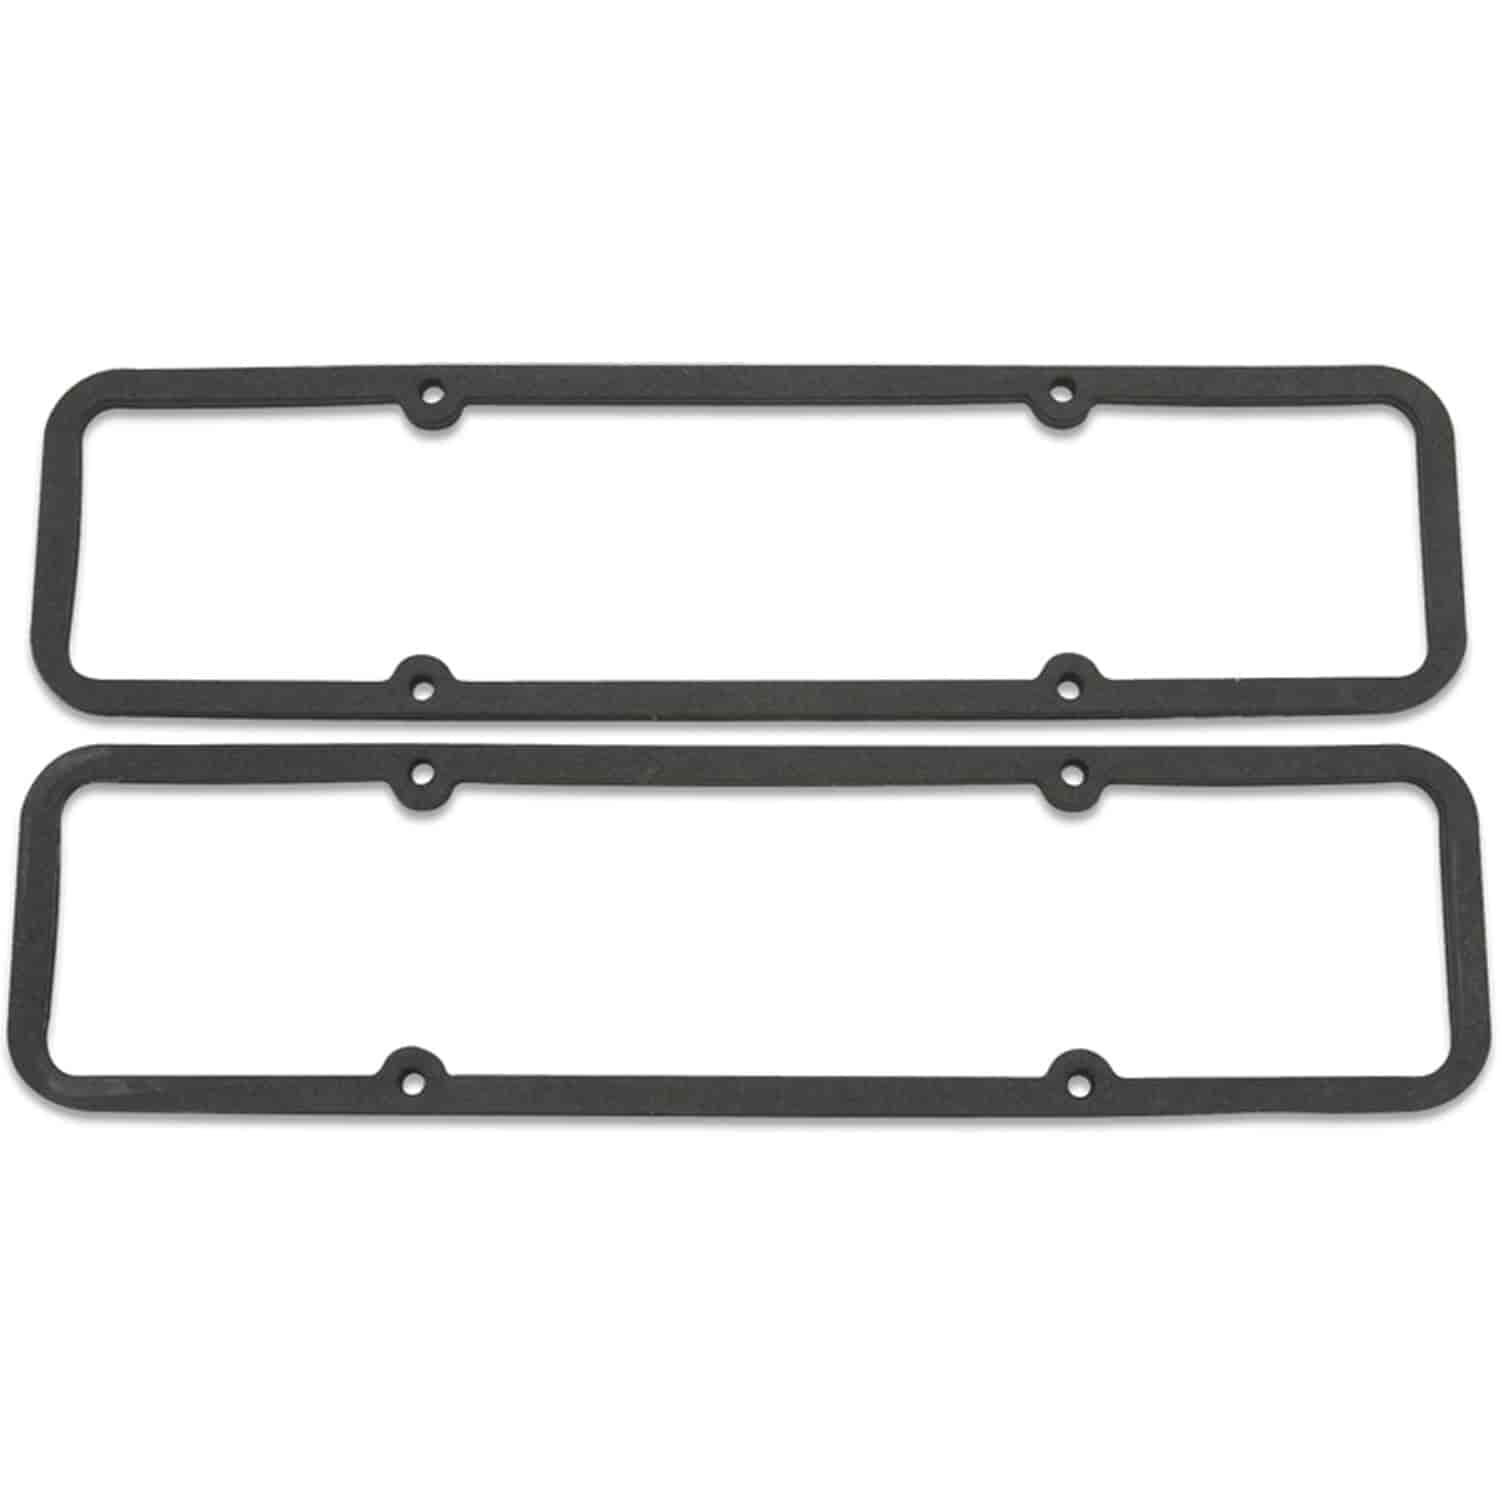 Valve Cover Gasket for Small Block Chevy